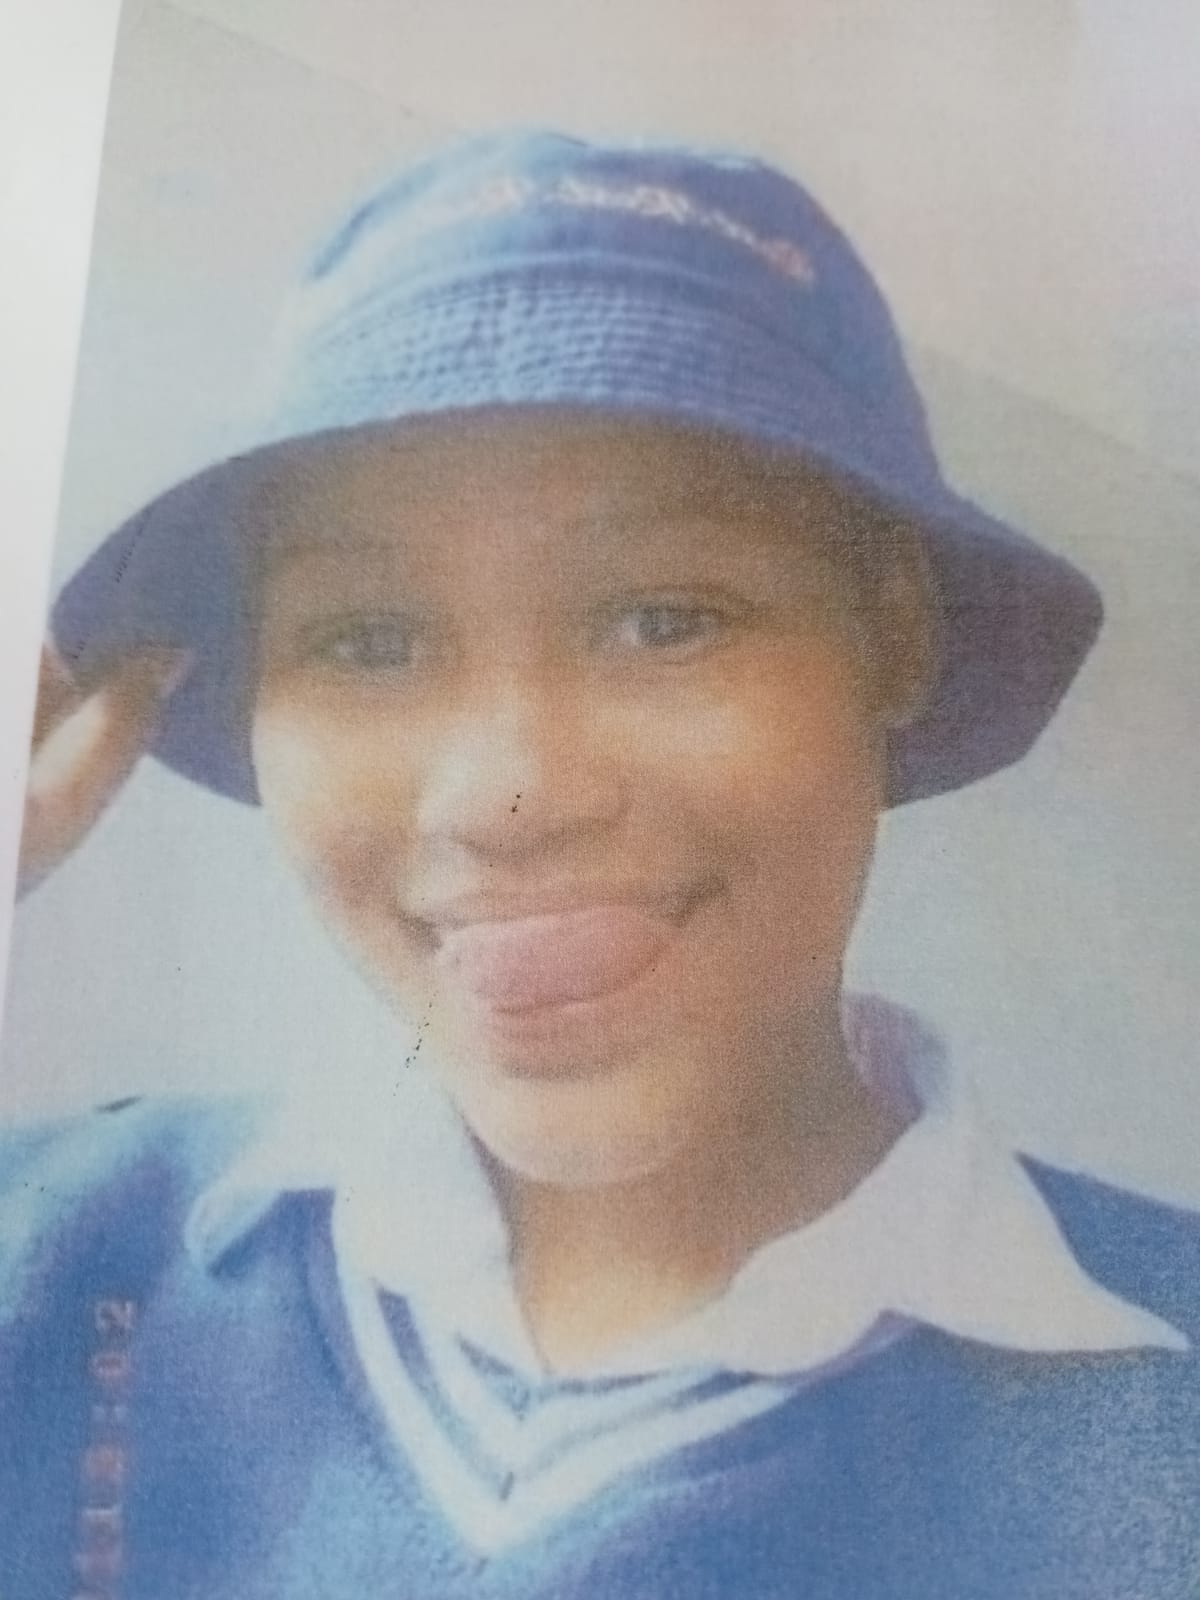 Missing girl sought by police in Galeshewe